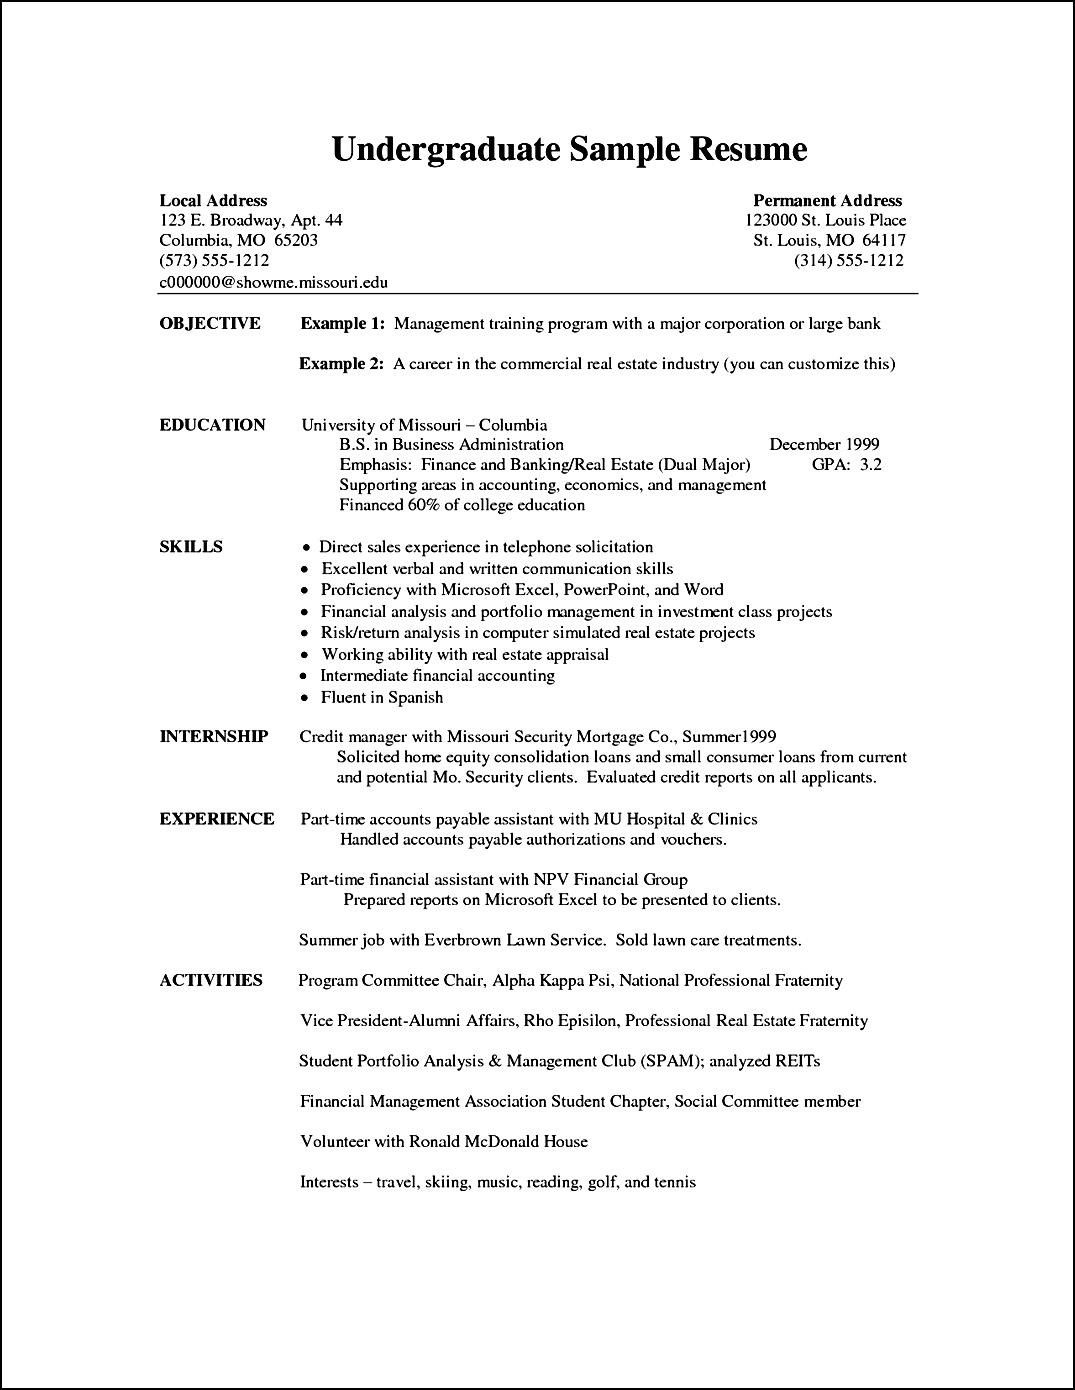 Resume Format Undergraduate Cv Examples Resume Format within proportions 1075 X 1390